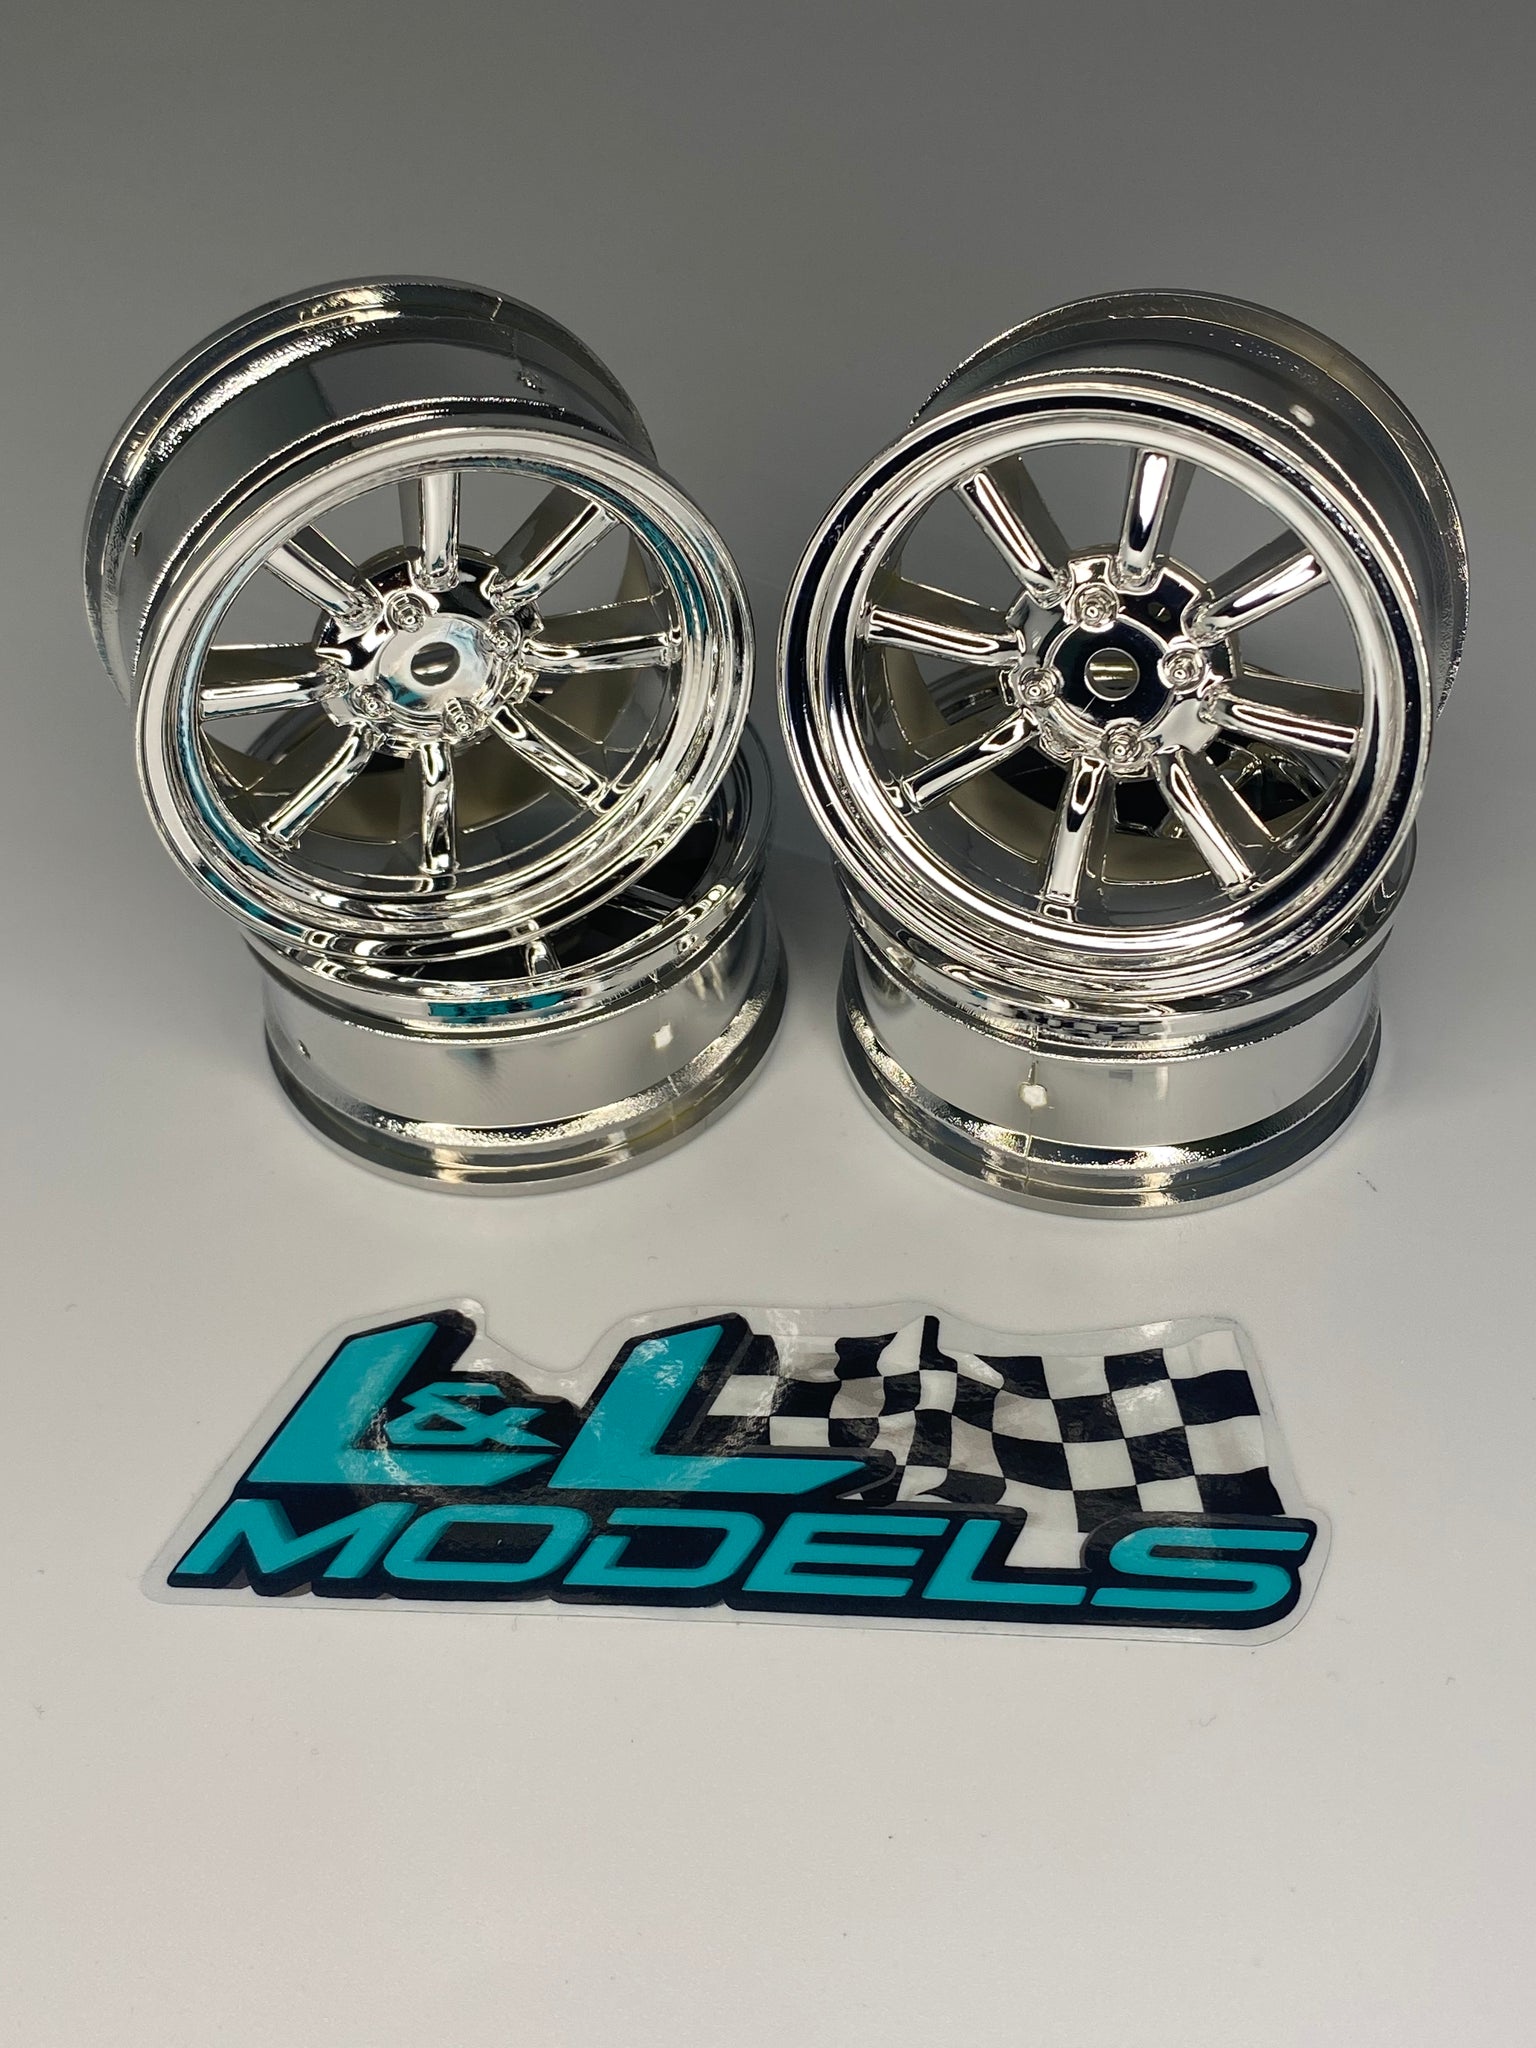 Minilite Ford Rs2000 Chrome 3mm offset 26mm Rc Touring Car Wheels For Tamiya TT01 TT02 HPI Kyosho 12mm Hex Not M Chassis lg066c